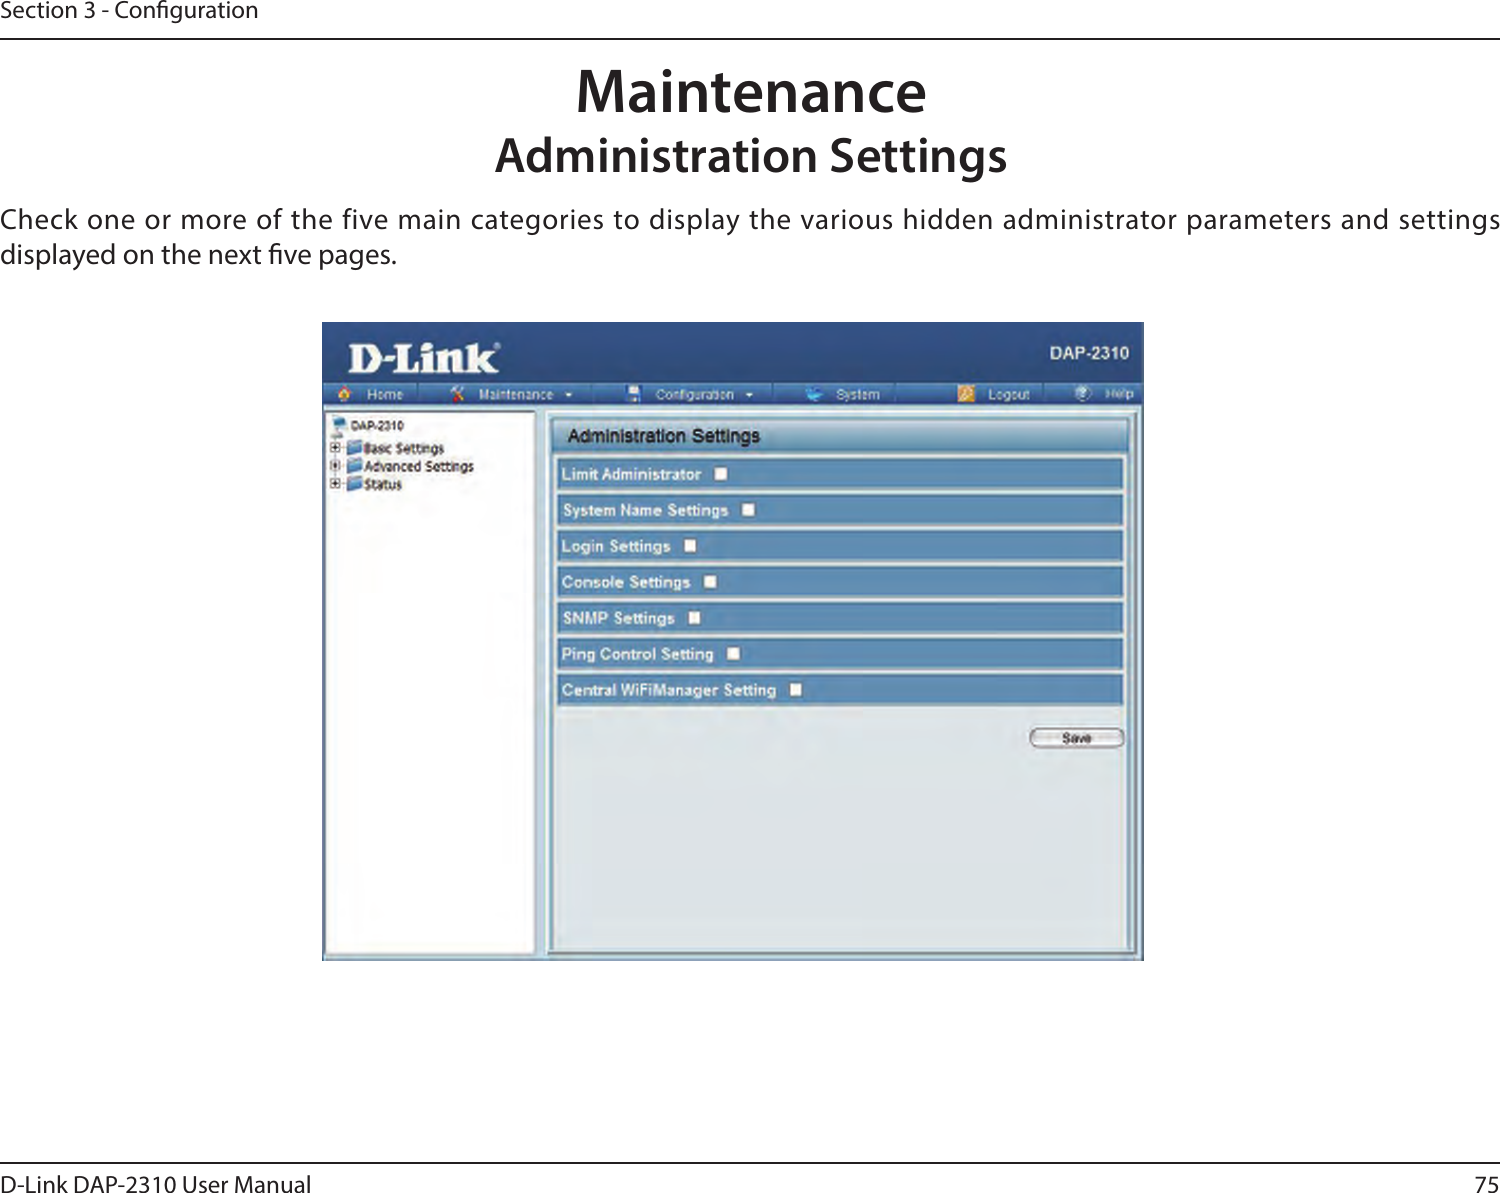 75D-Link DAP-2310 User ManualSection 3 - CongurationCheck one or more of the five main categories to display the various hidden administrator parameters and settings displayed on the next ve pages.  Maintenance Administration Settings